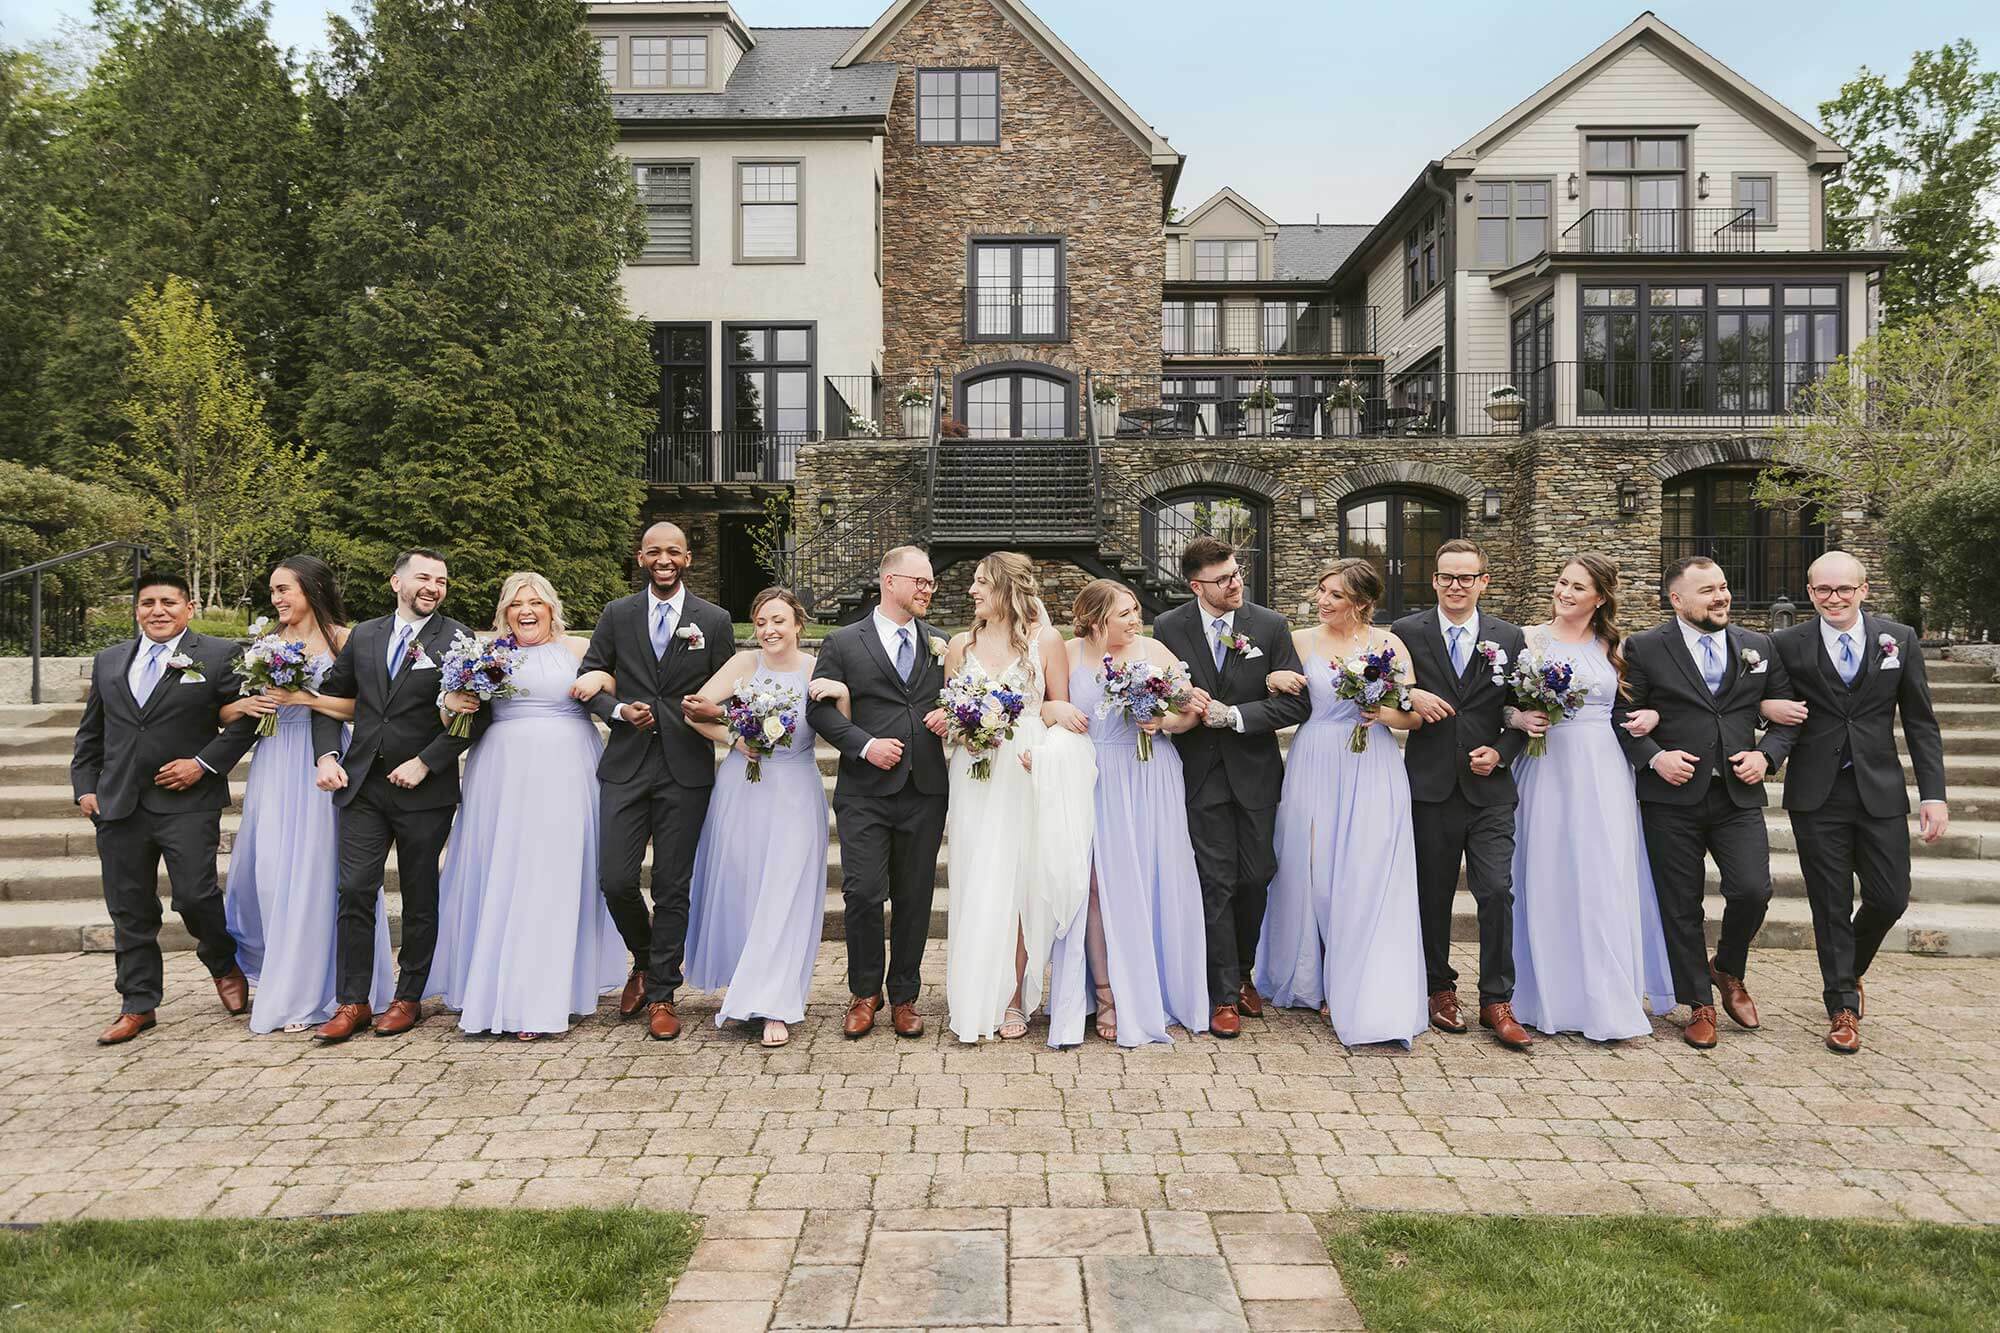 A group of bridesmaids and groomsmen pose in front of a mansion.